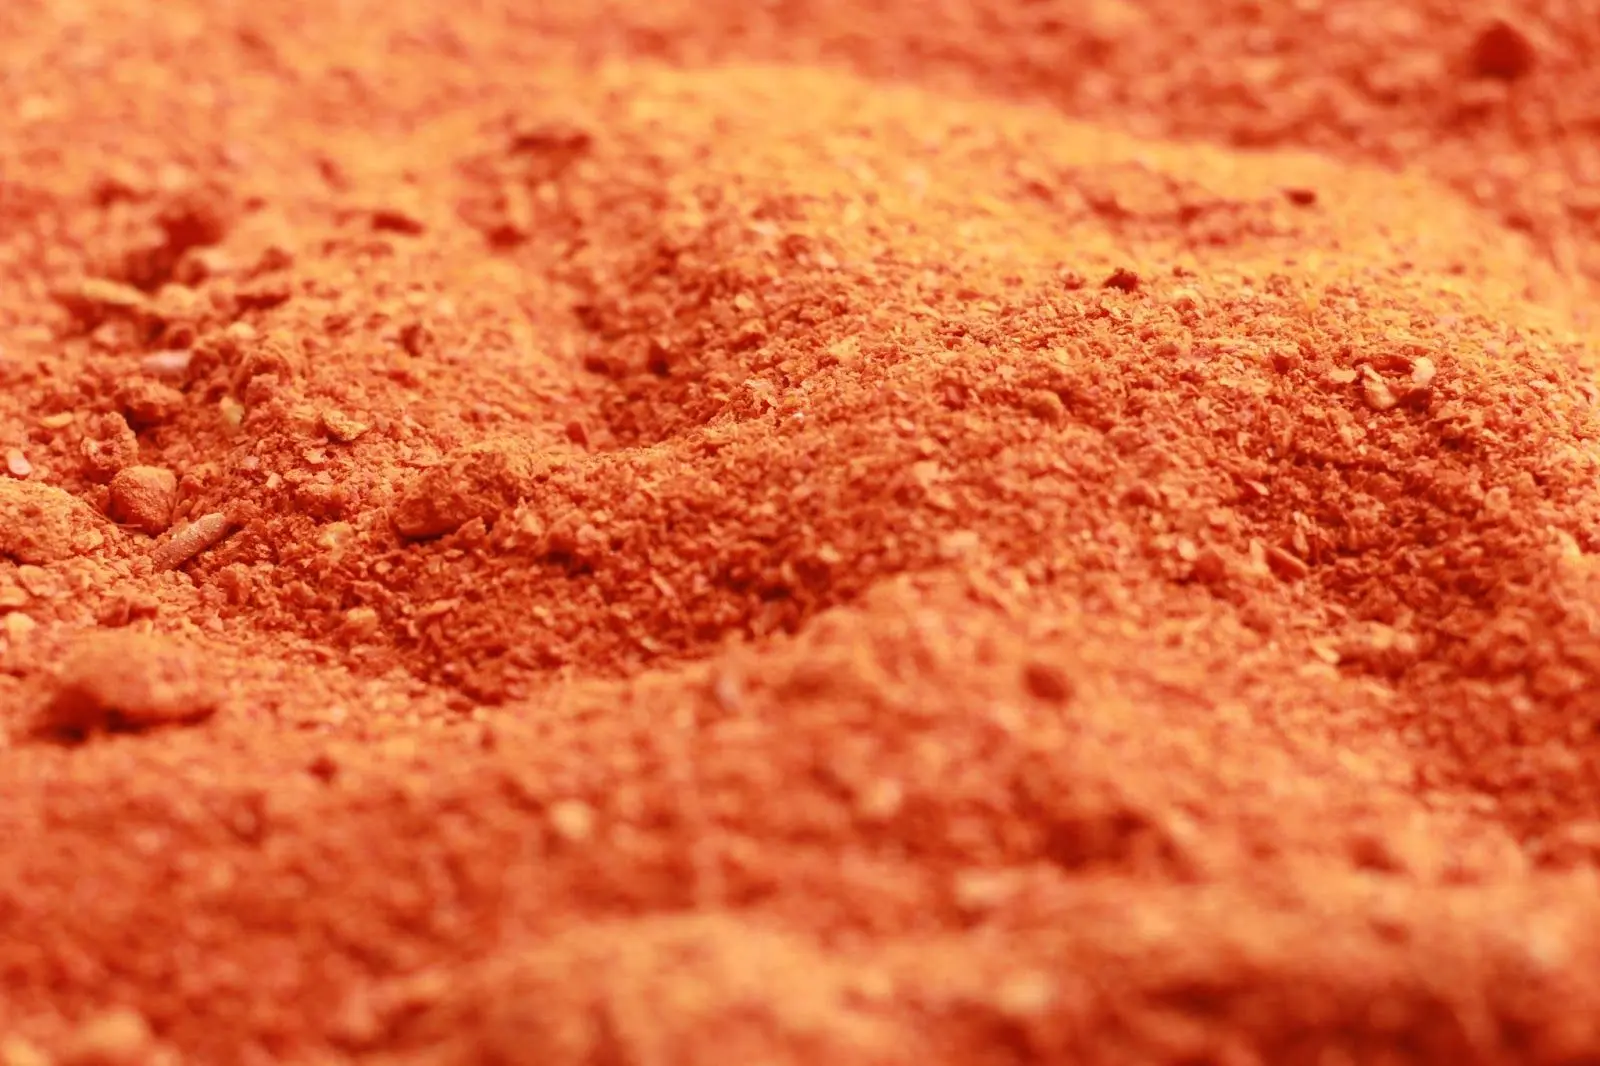 can dogs have smoked paprika - What spices can dogs eat safely